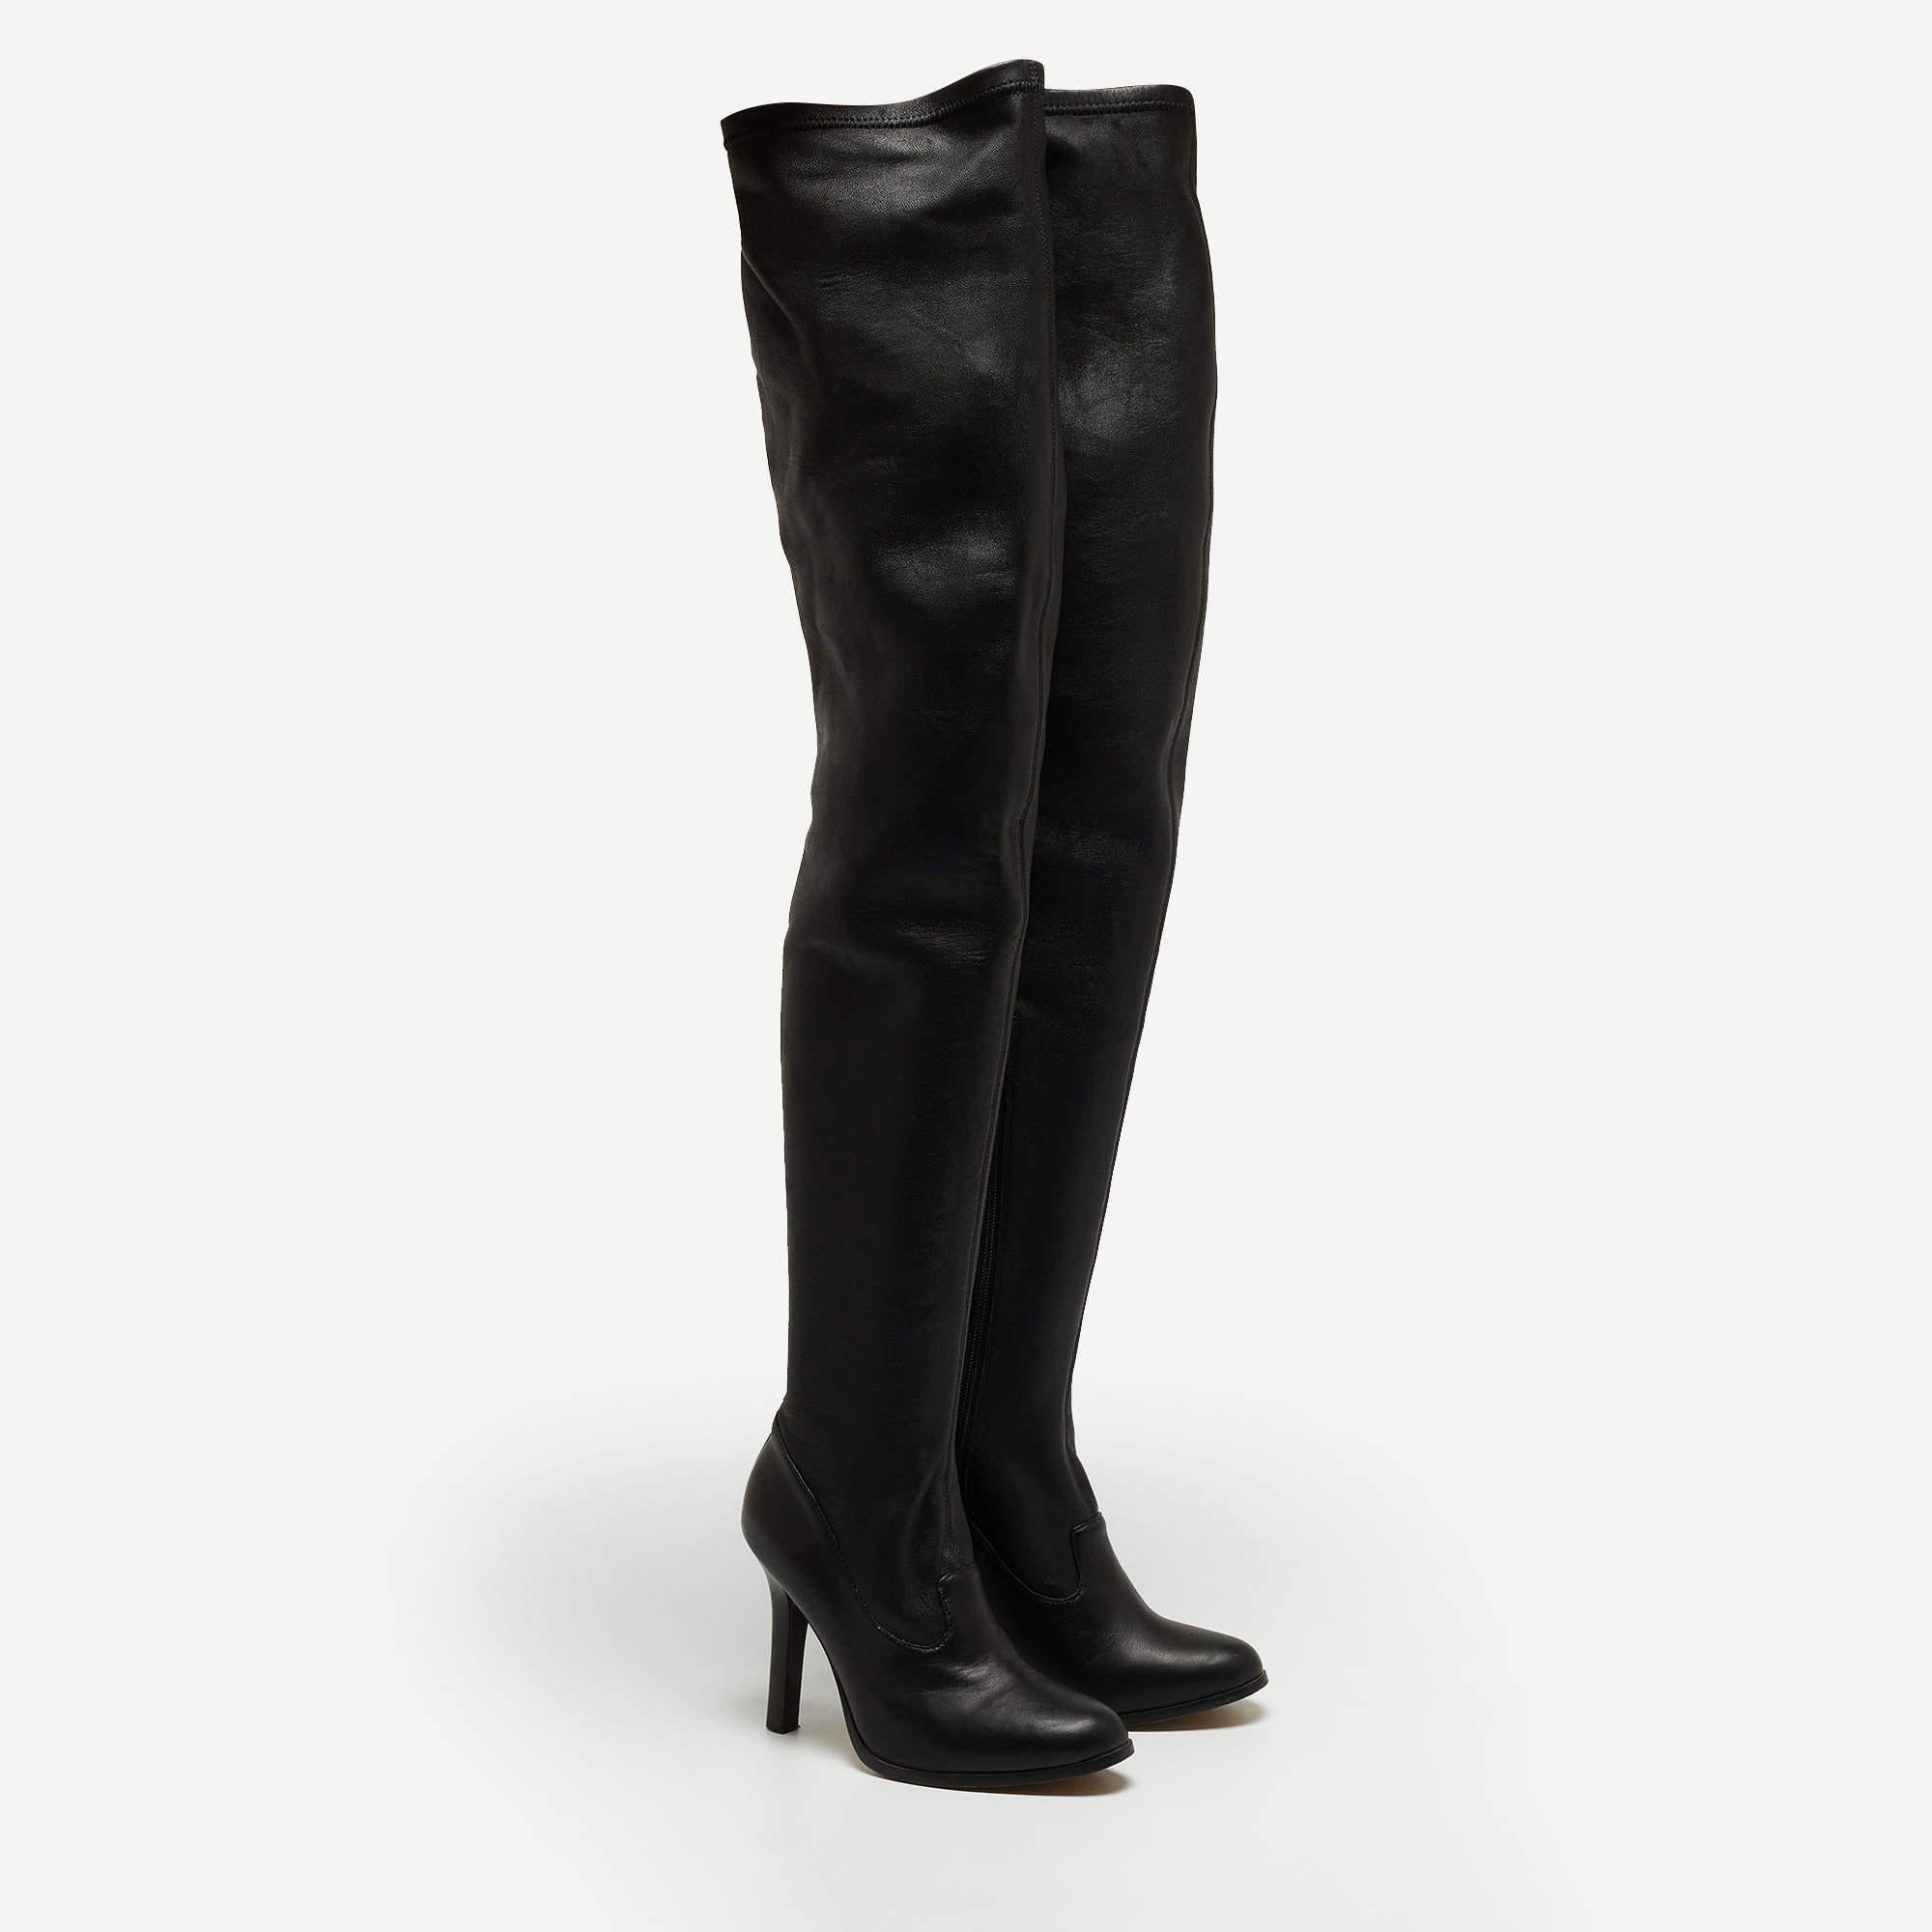 Jimmy Choo For H&M Black Leather Thigh High Boots  In Good Condition For Sale In Dubai, Al Qouz 2